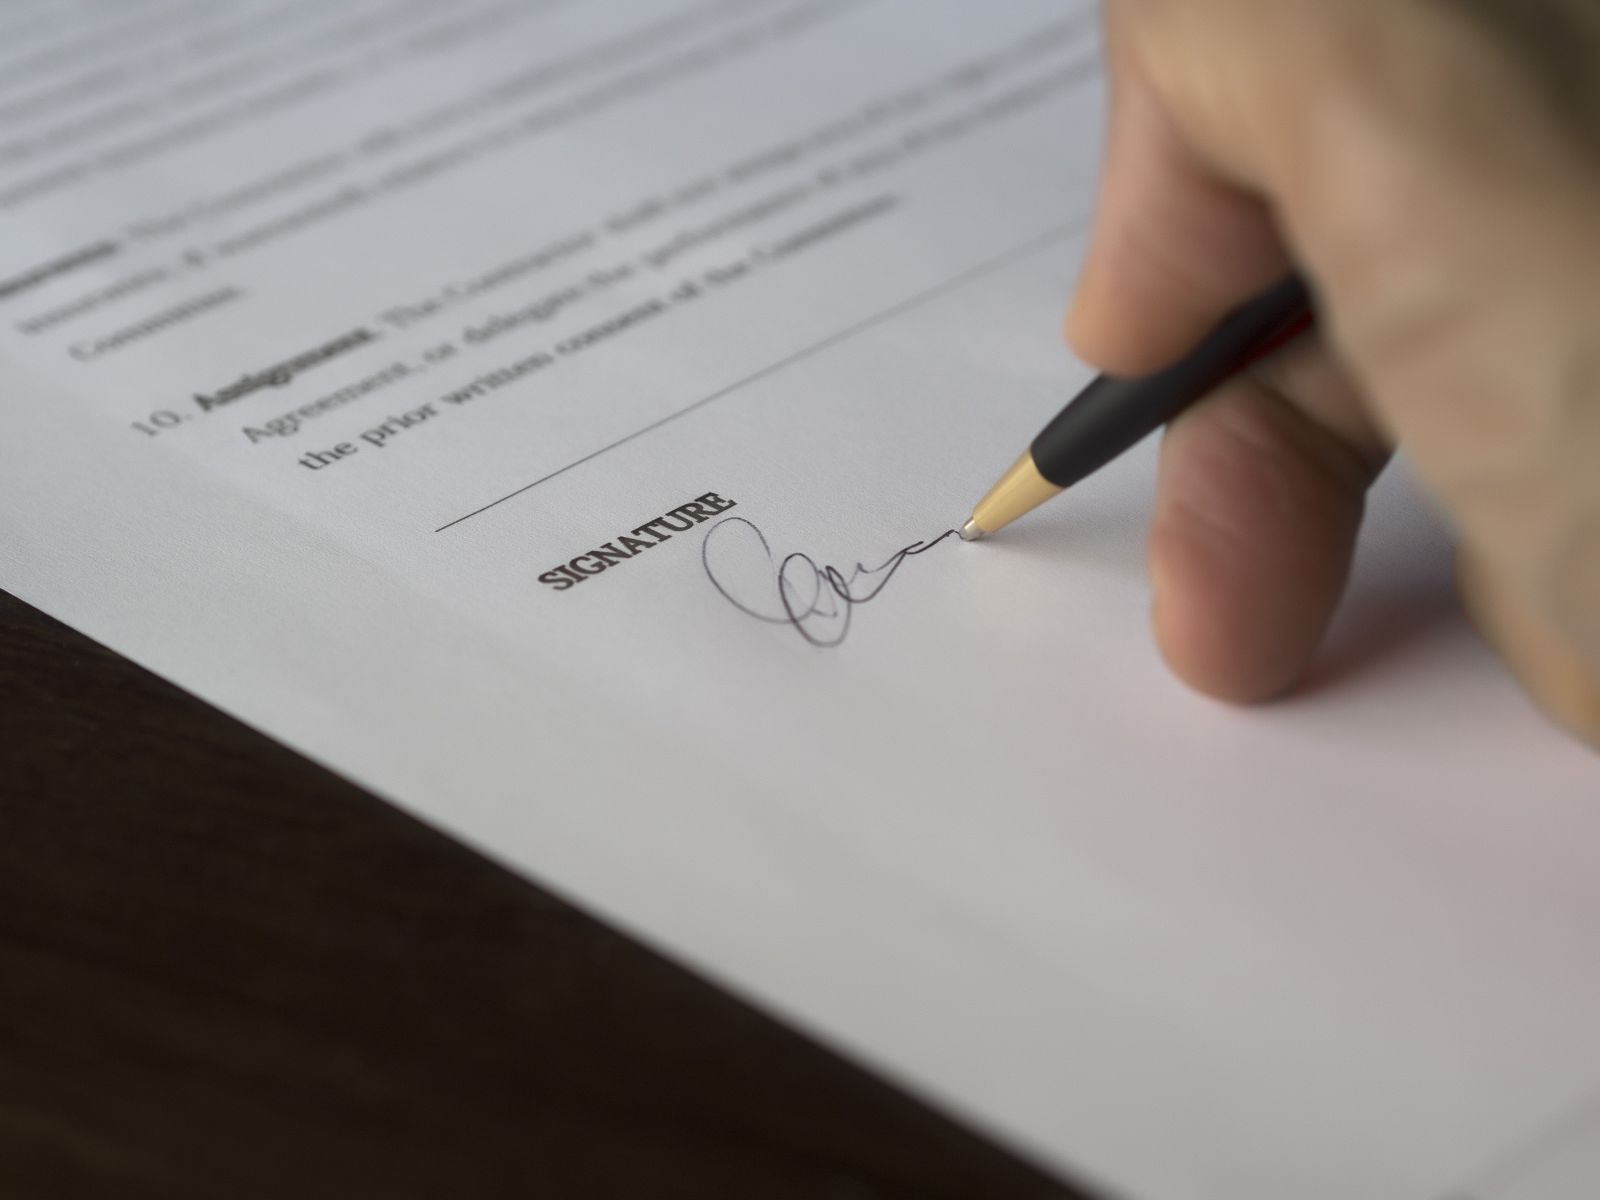 Do: Get a Contract / Agreement in Writing